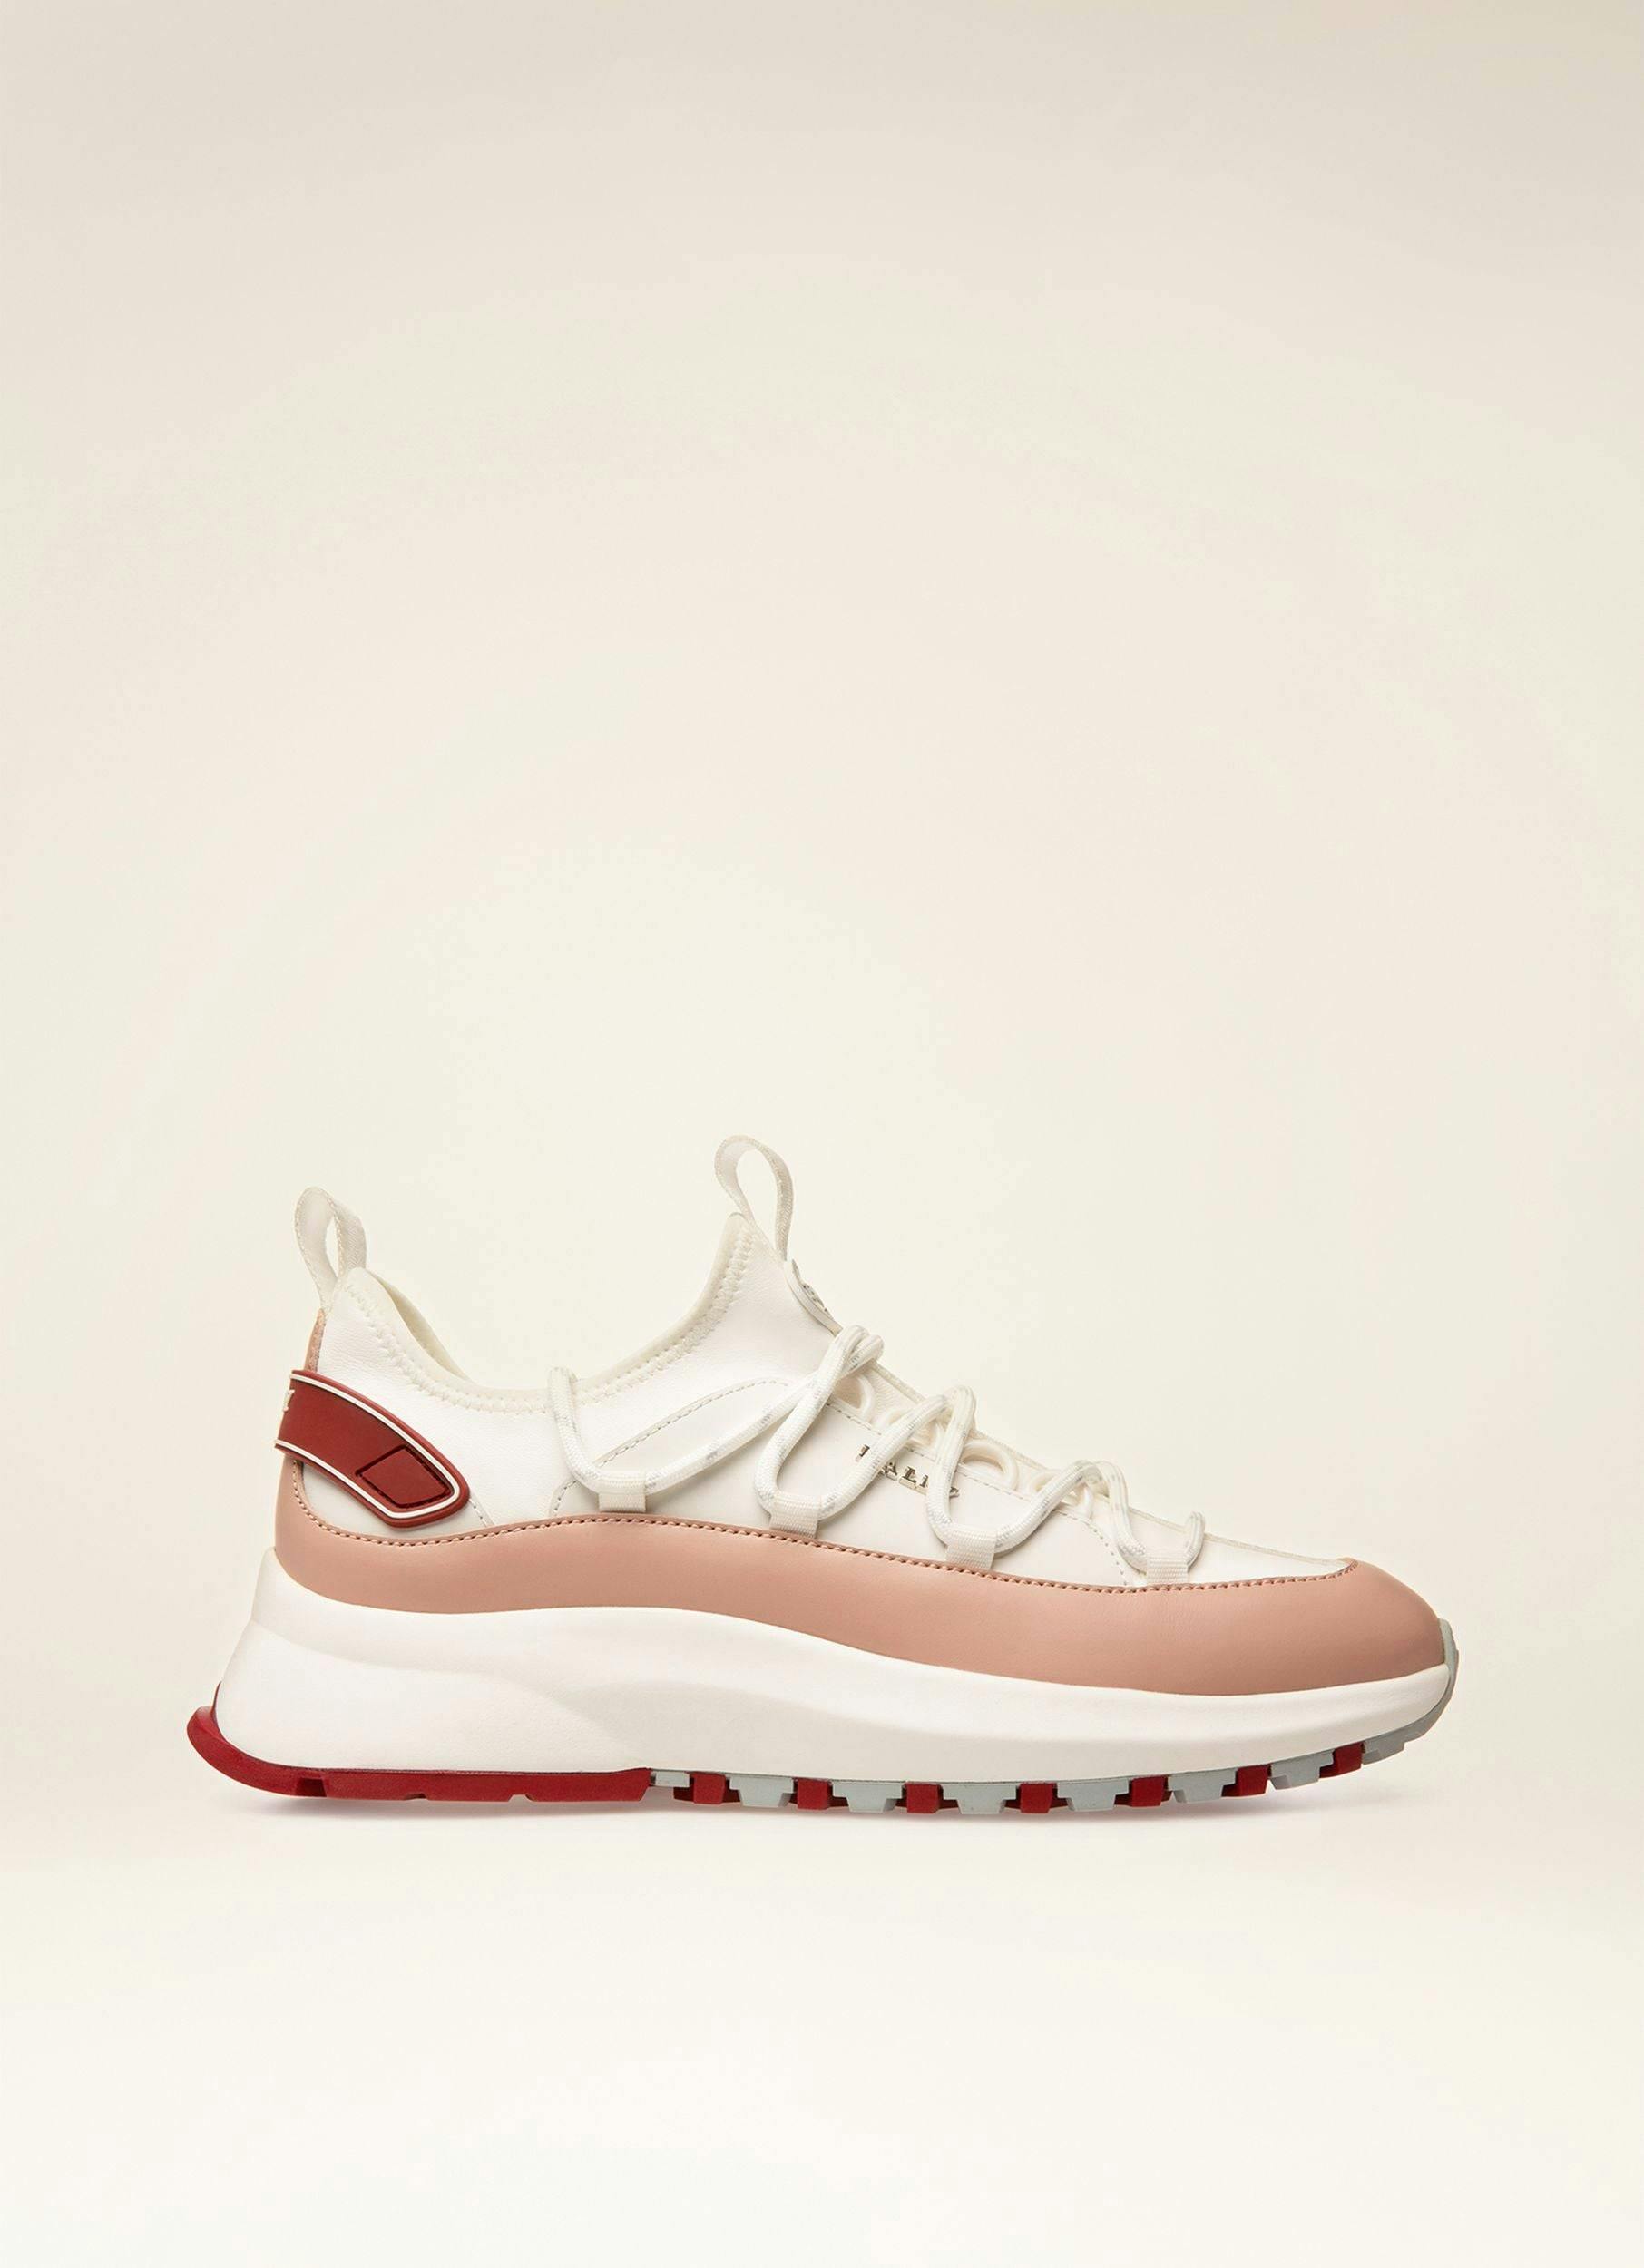 OUTLINE Leather Sneakers In White & Pink - Women's - Bally - 01